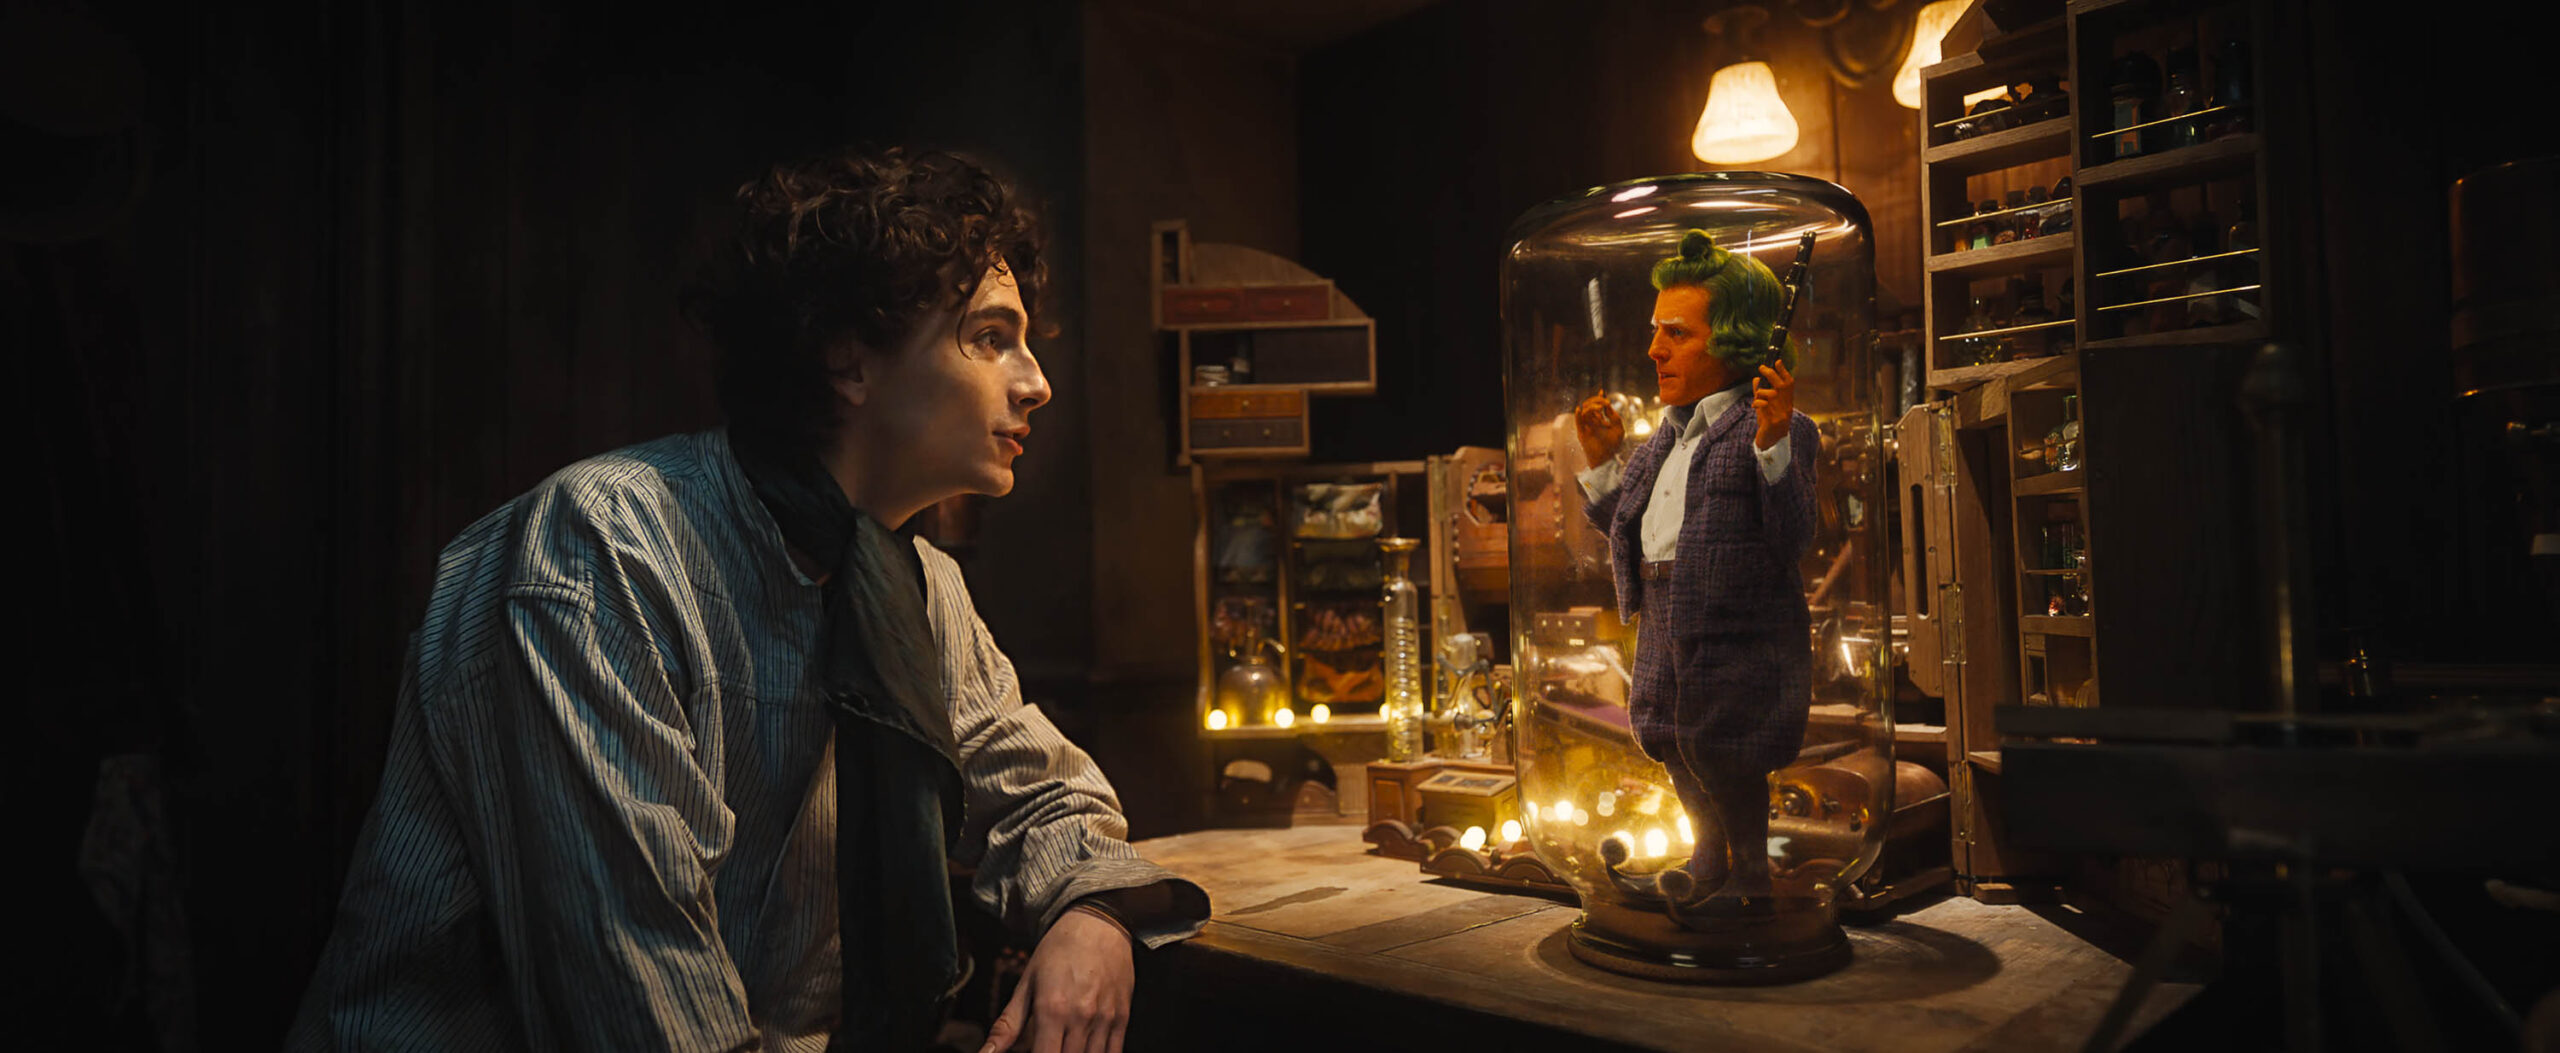 Timothée Chalamet come Willy Wonka e Hugh Grant come un Oompa Loompa nel film Wonka [tag: Timothée Chalamet, Hugh Grant] [credit: Copyright 2023 Warner Bros. Entertainment Inc. All Rights Reserved; courtesy of Warner Bros. Pictures]